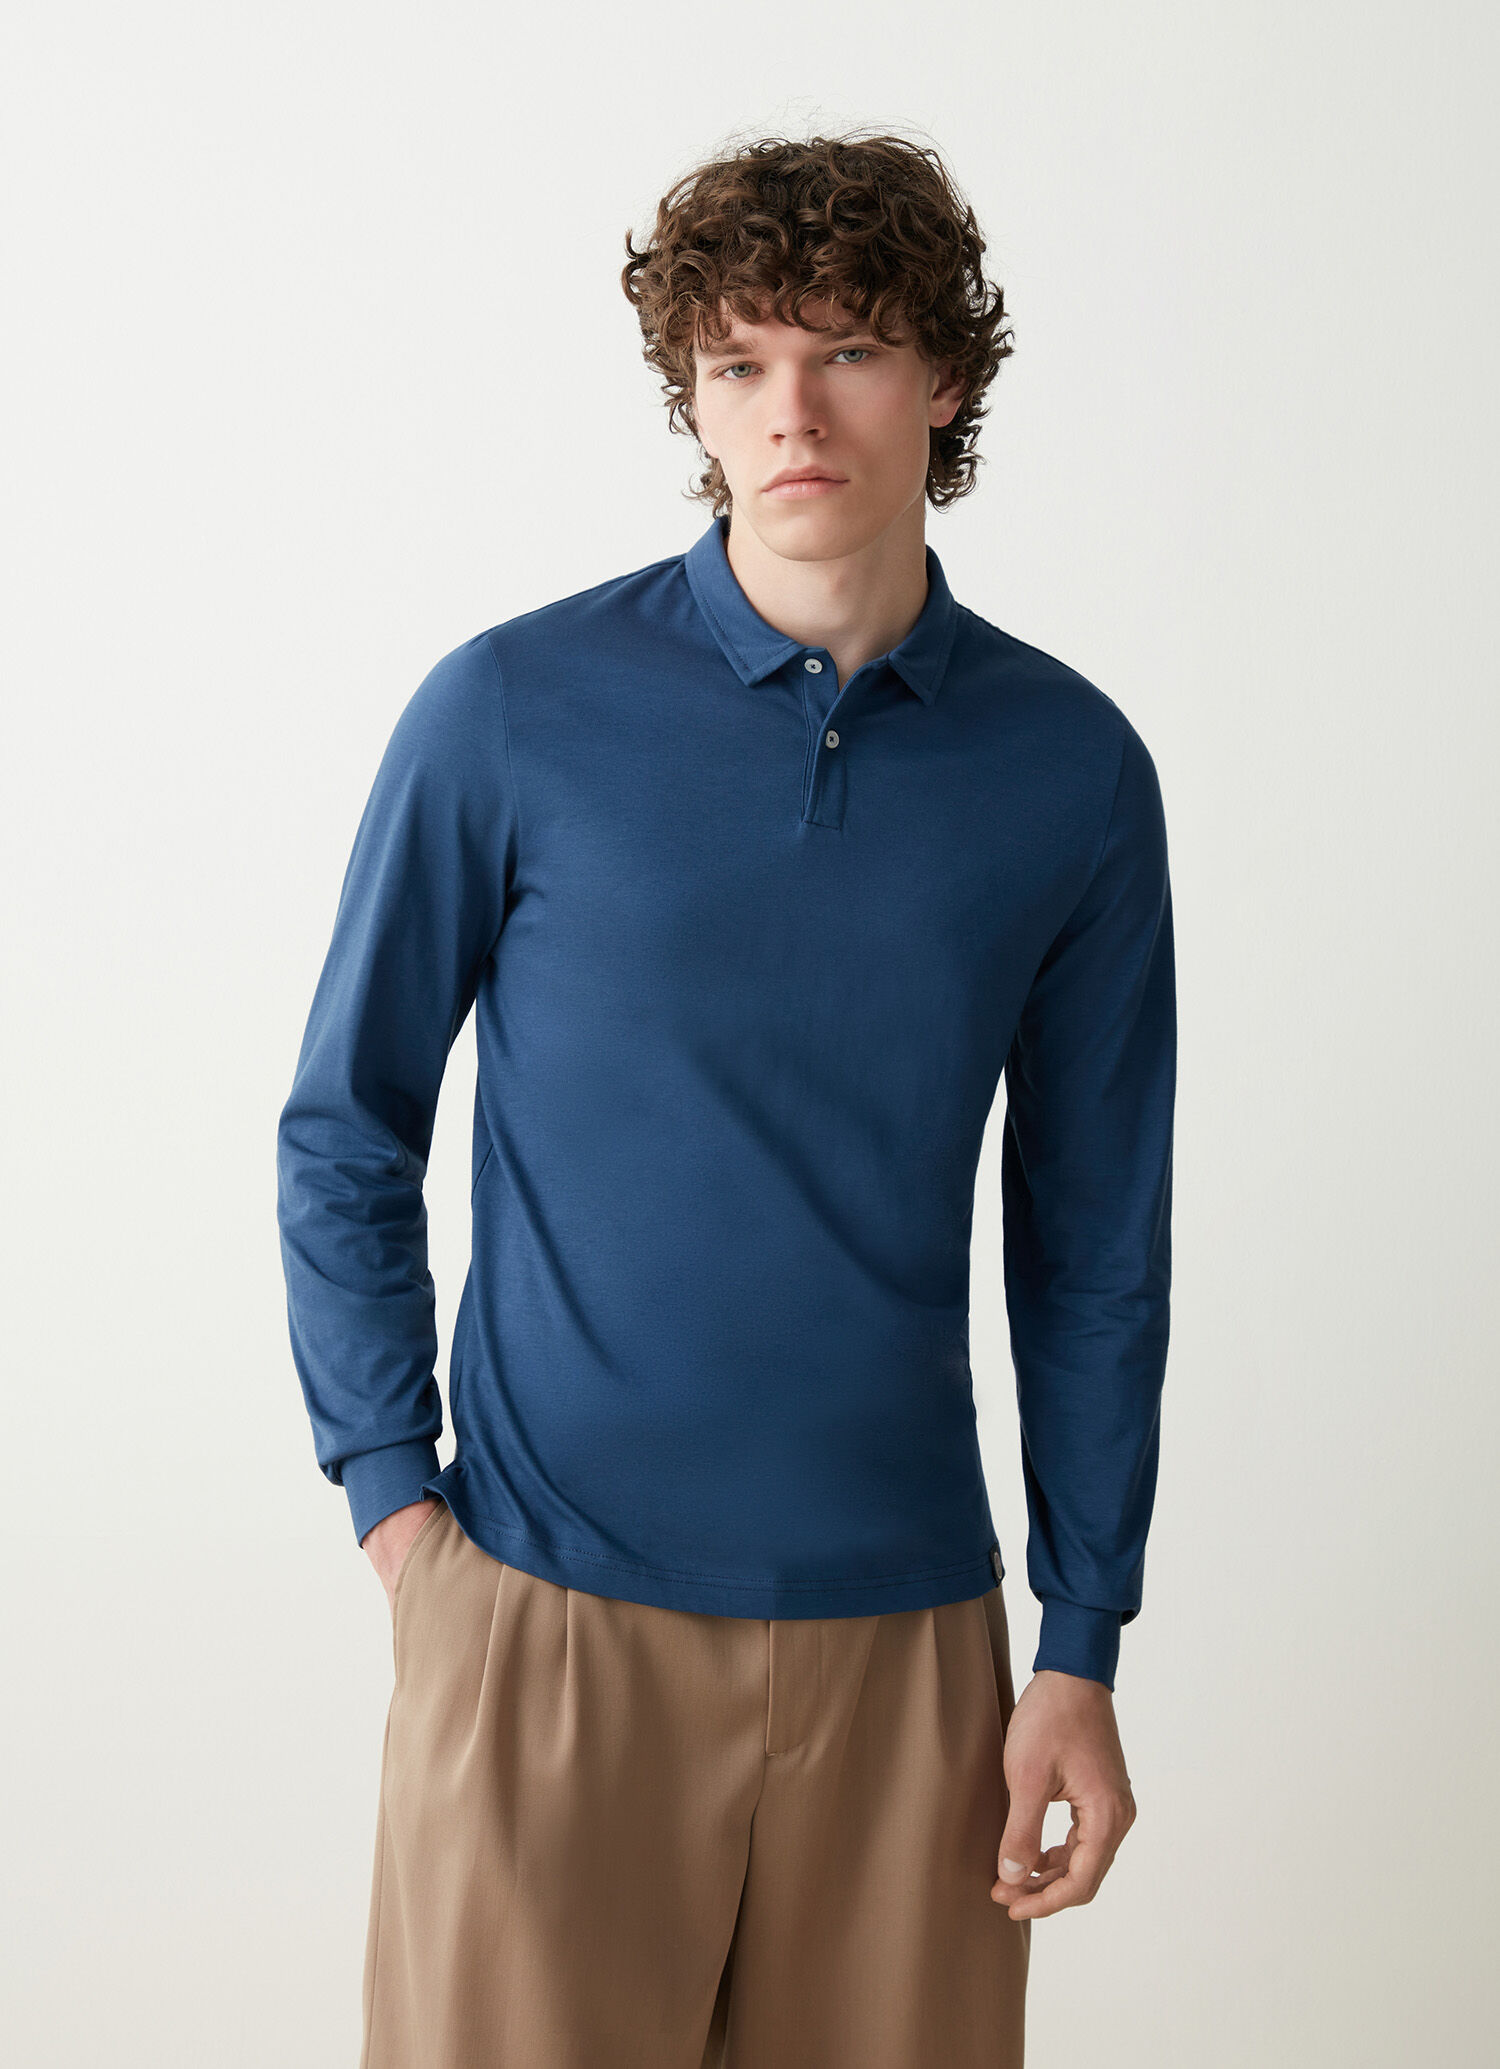 Long-sleeved polo shirt with shirt-style collar